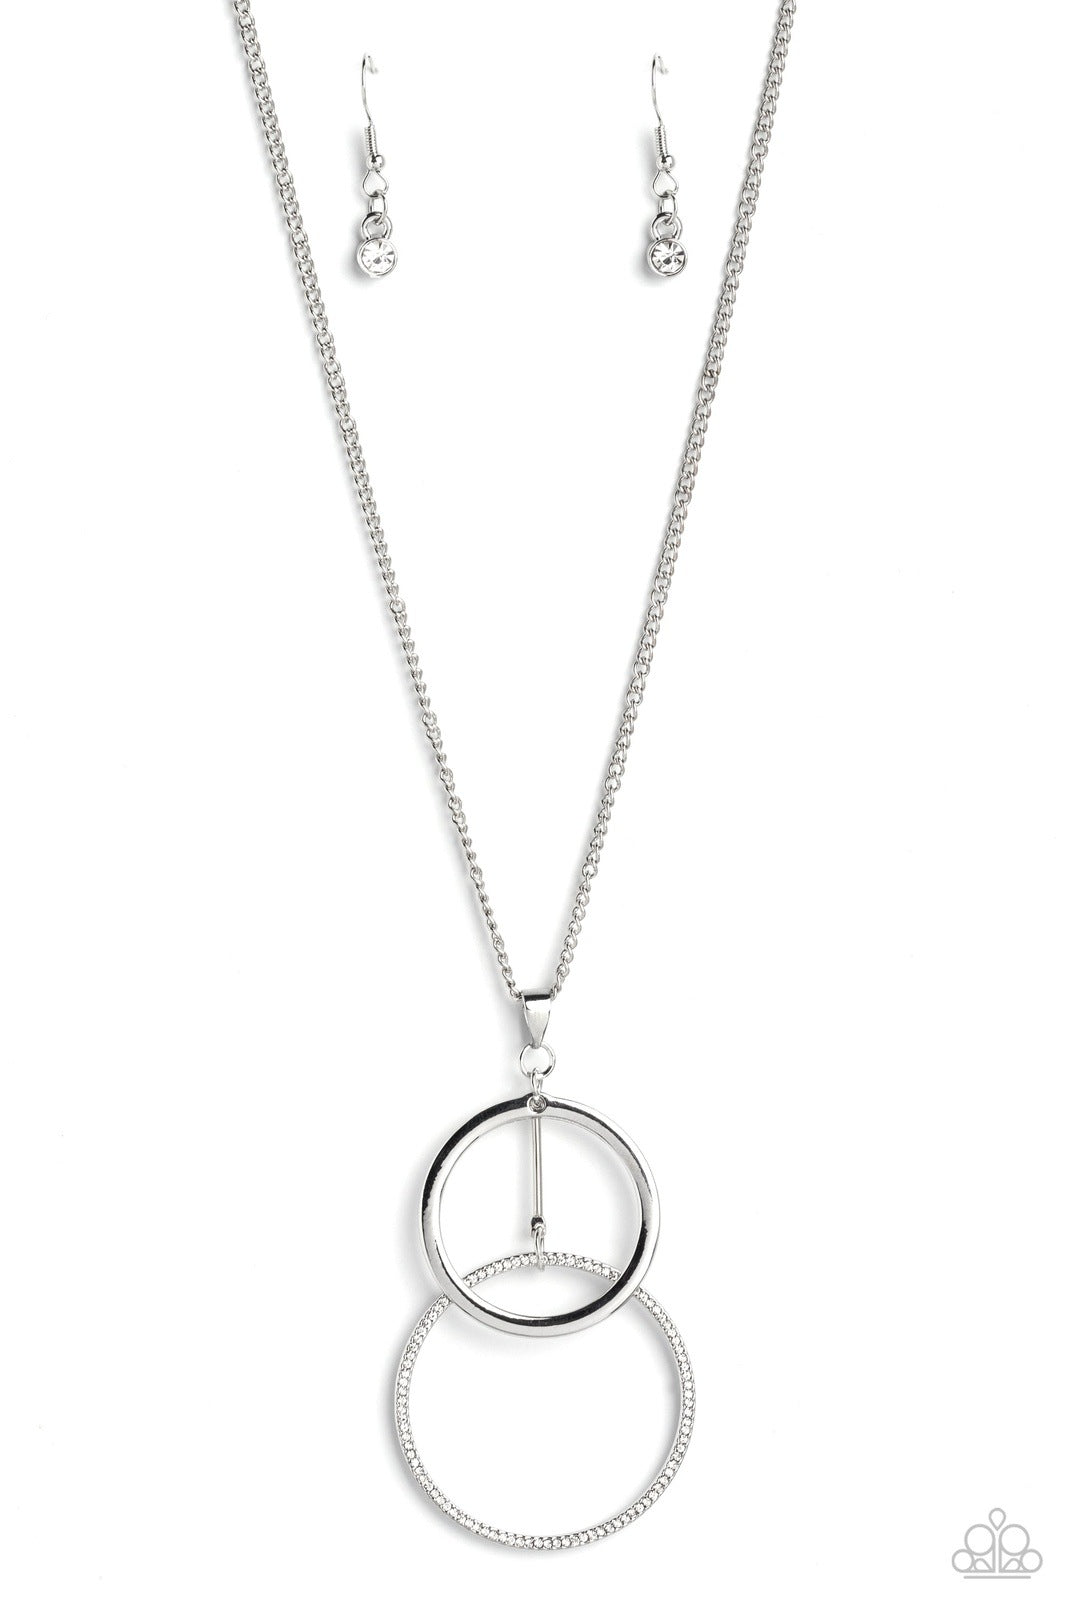 WISHING WELL WHIMSY WHITE-NECKLACE